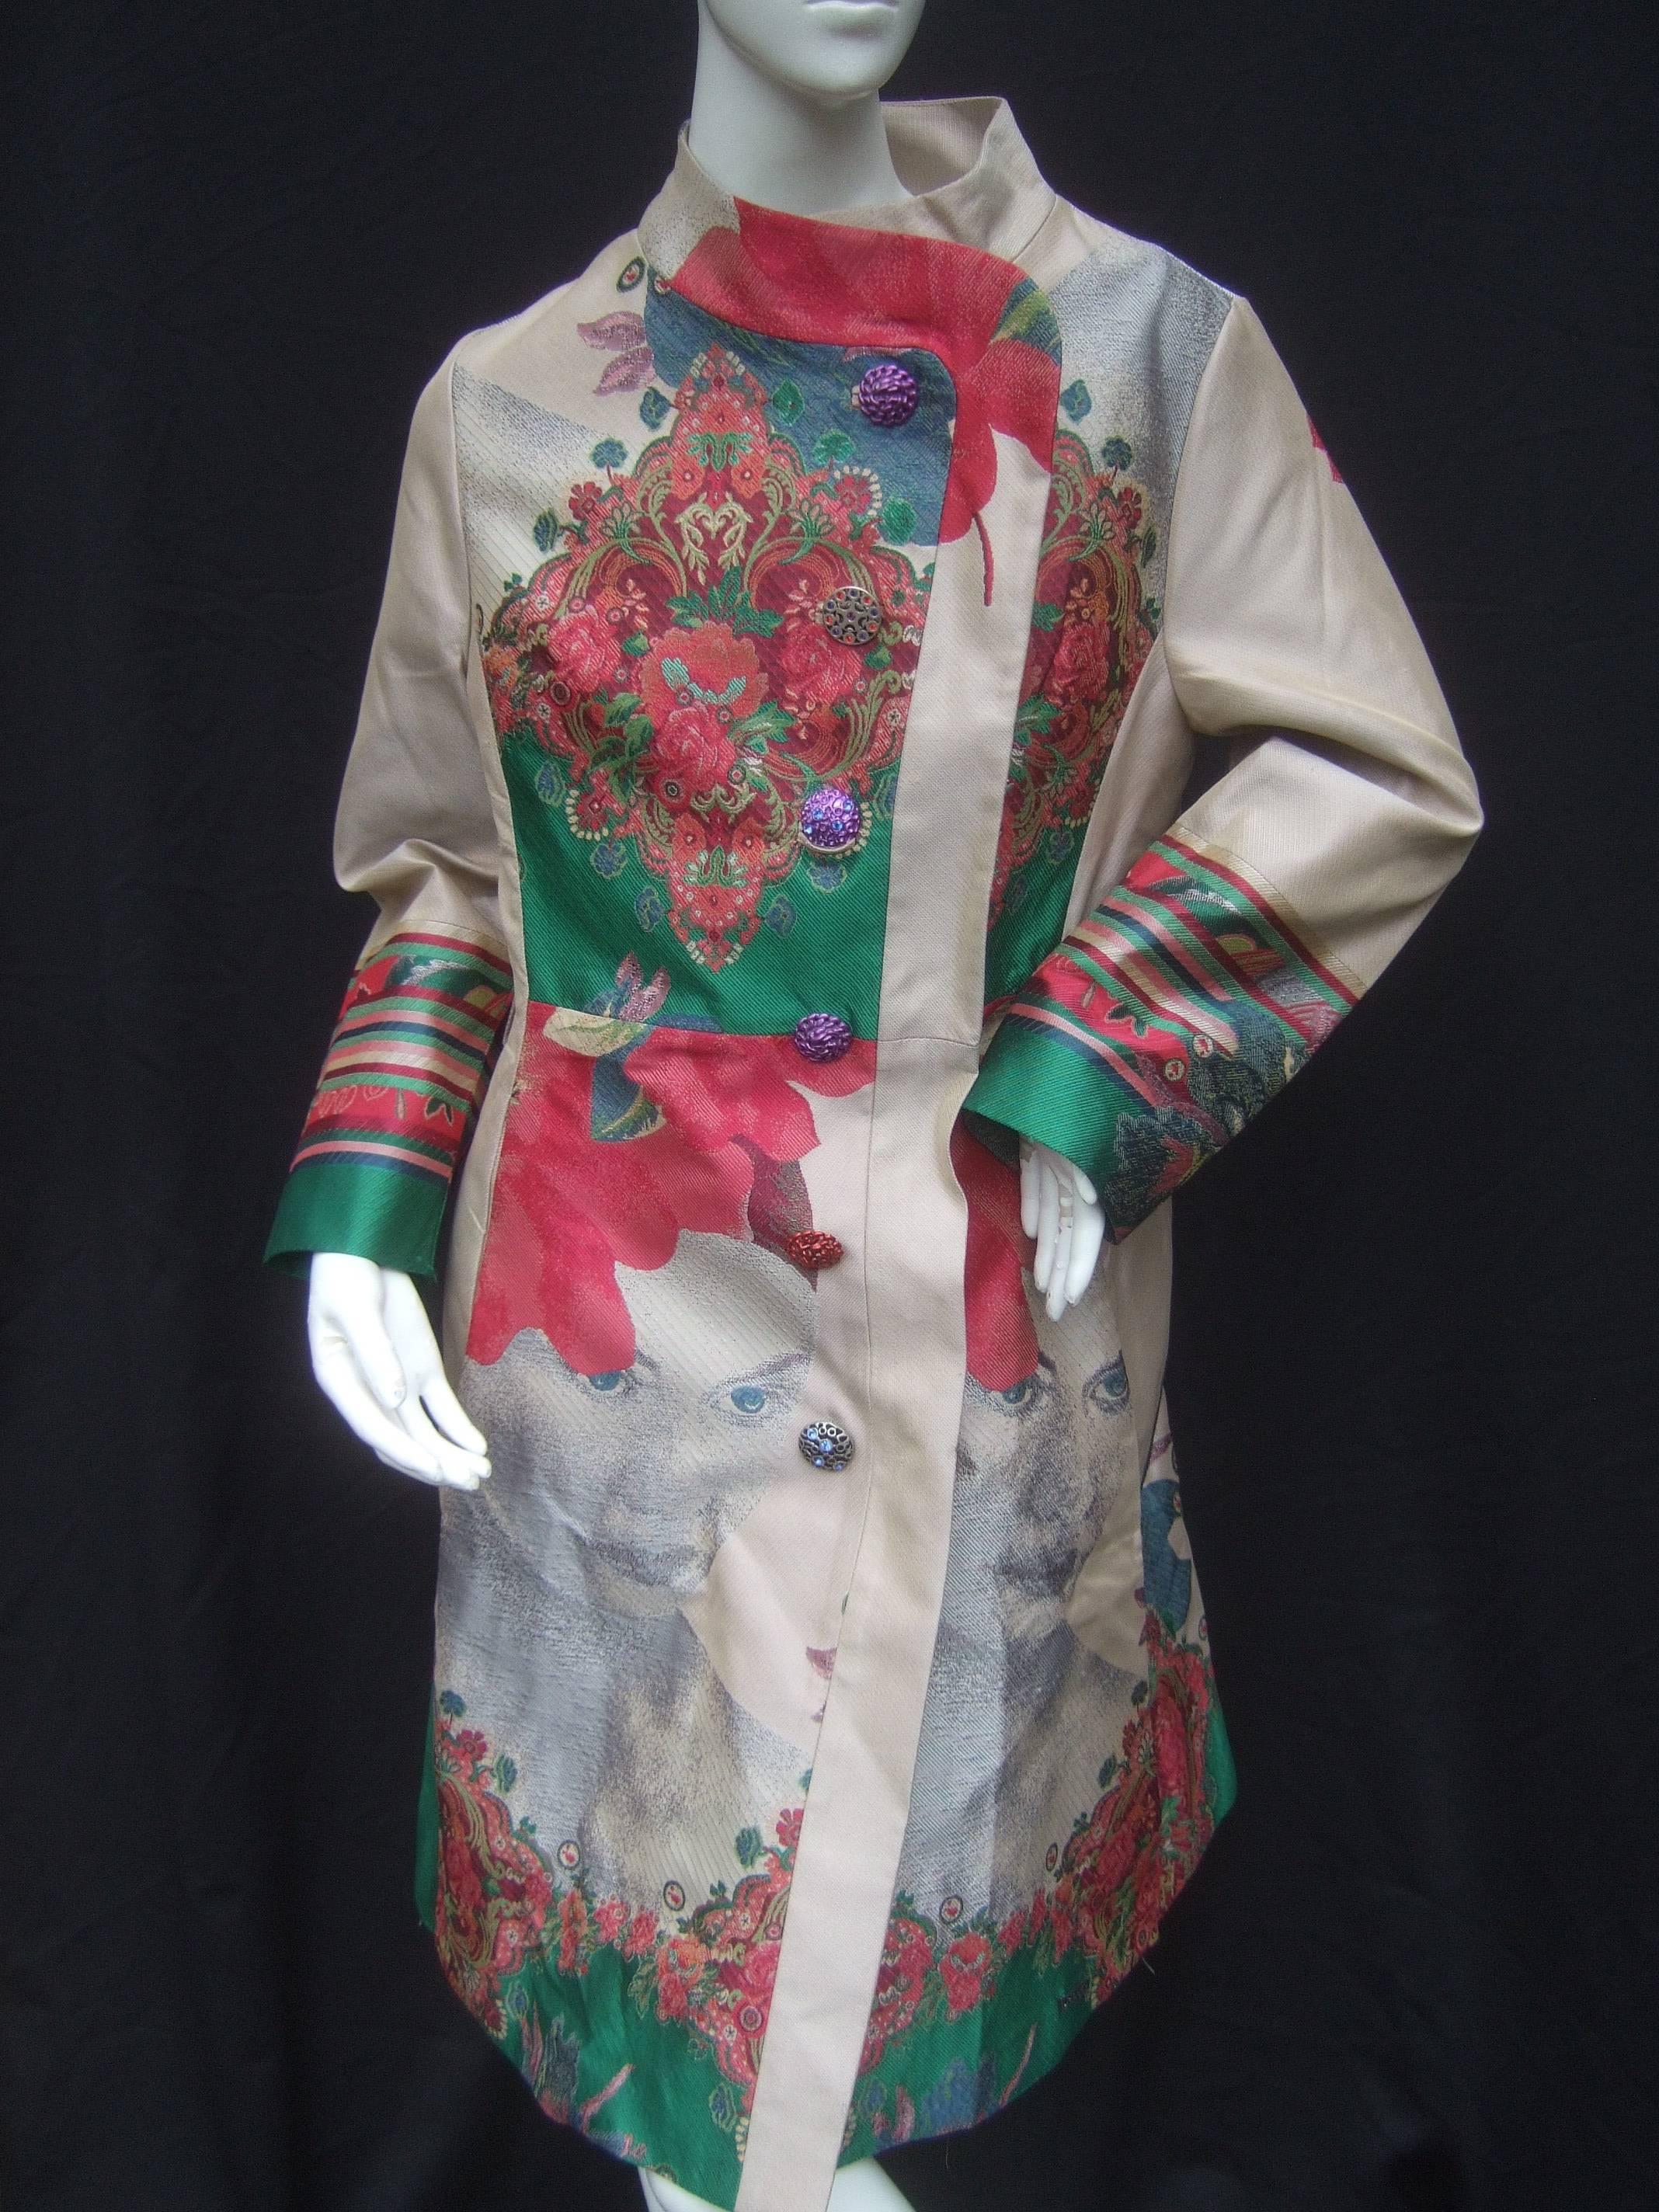 Exotic tapestry floral print spring coat
The Asian inspired light weight coat is illustrated
with bold floral graphics scattered throughout 
the front and back

The bohemian style buttons are a collection
of various styles with enamel and